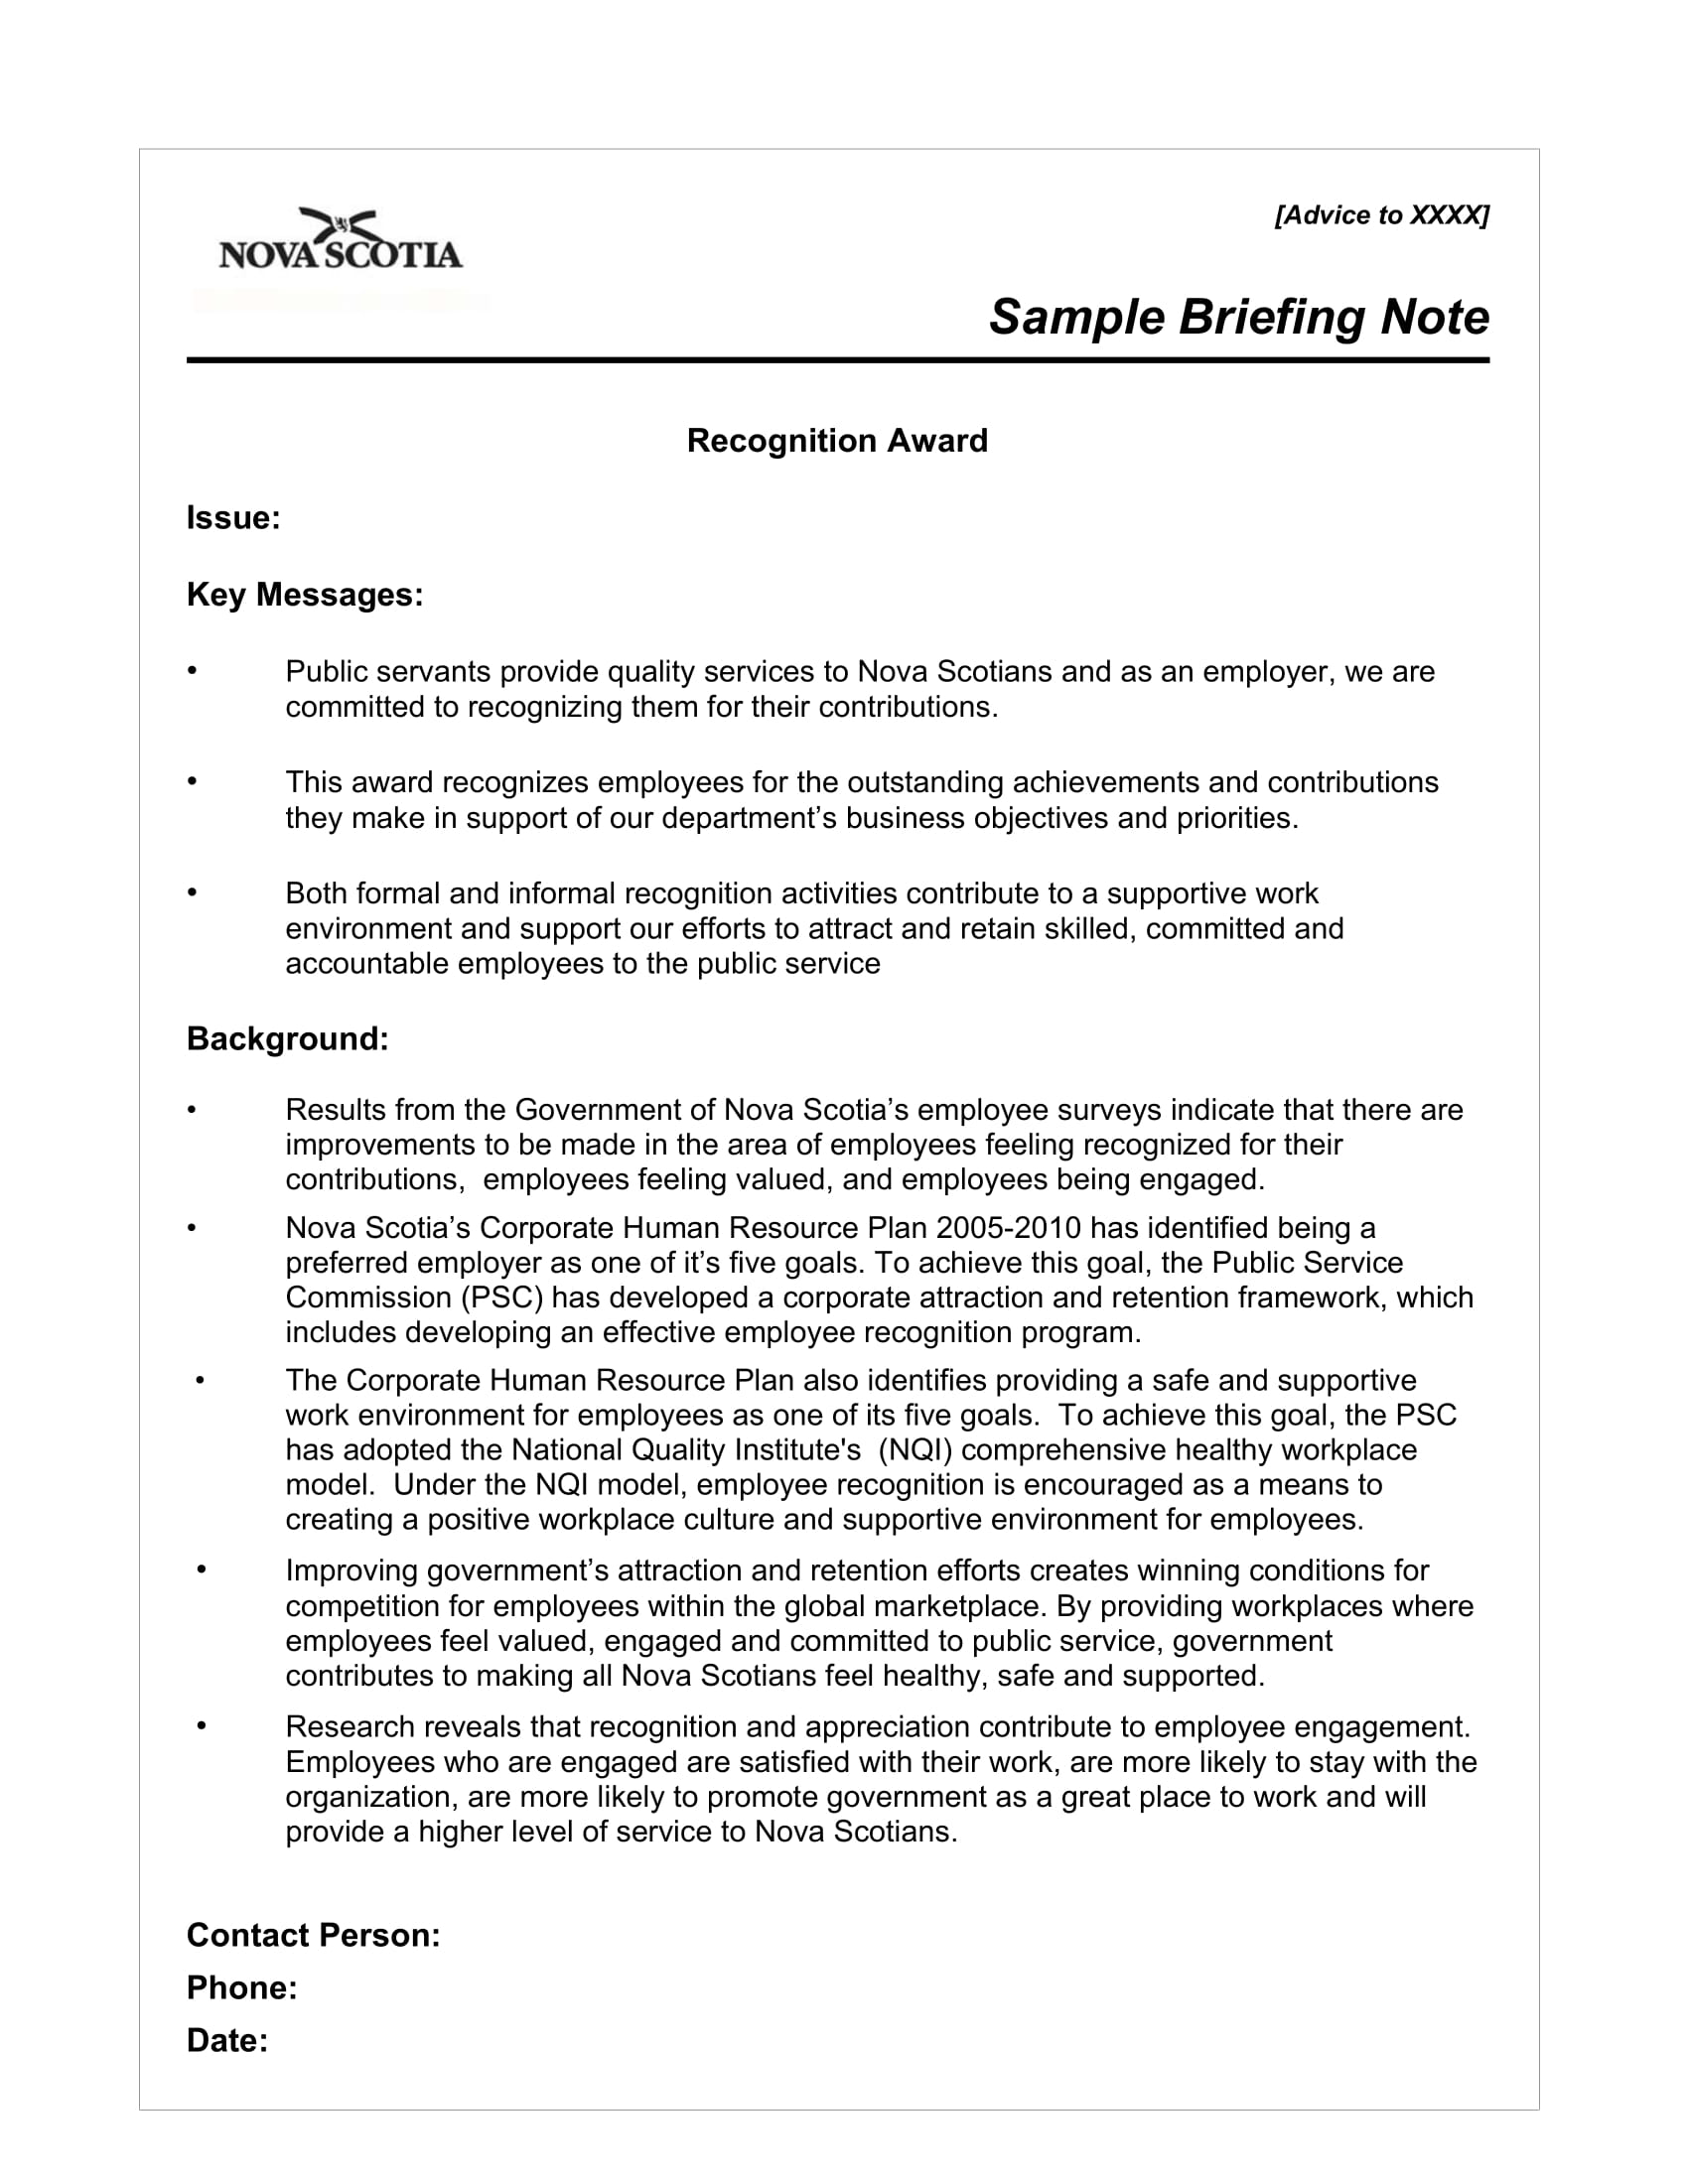 basic briefing note template example